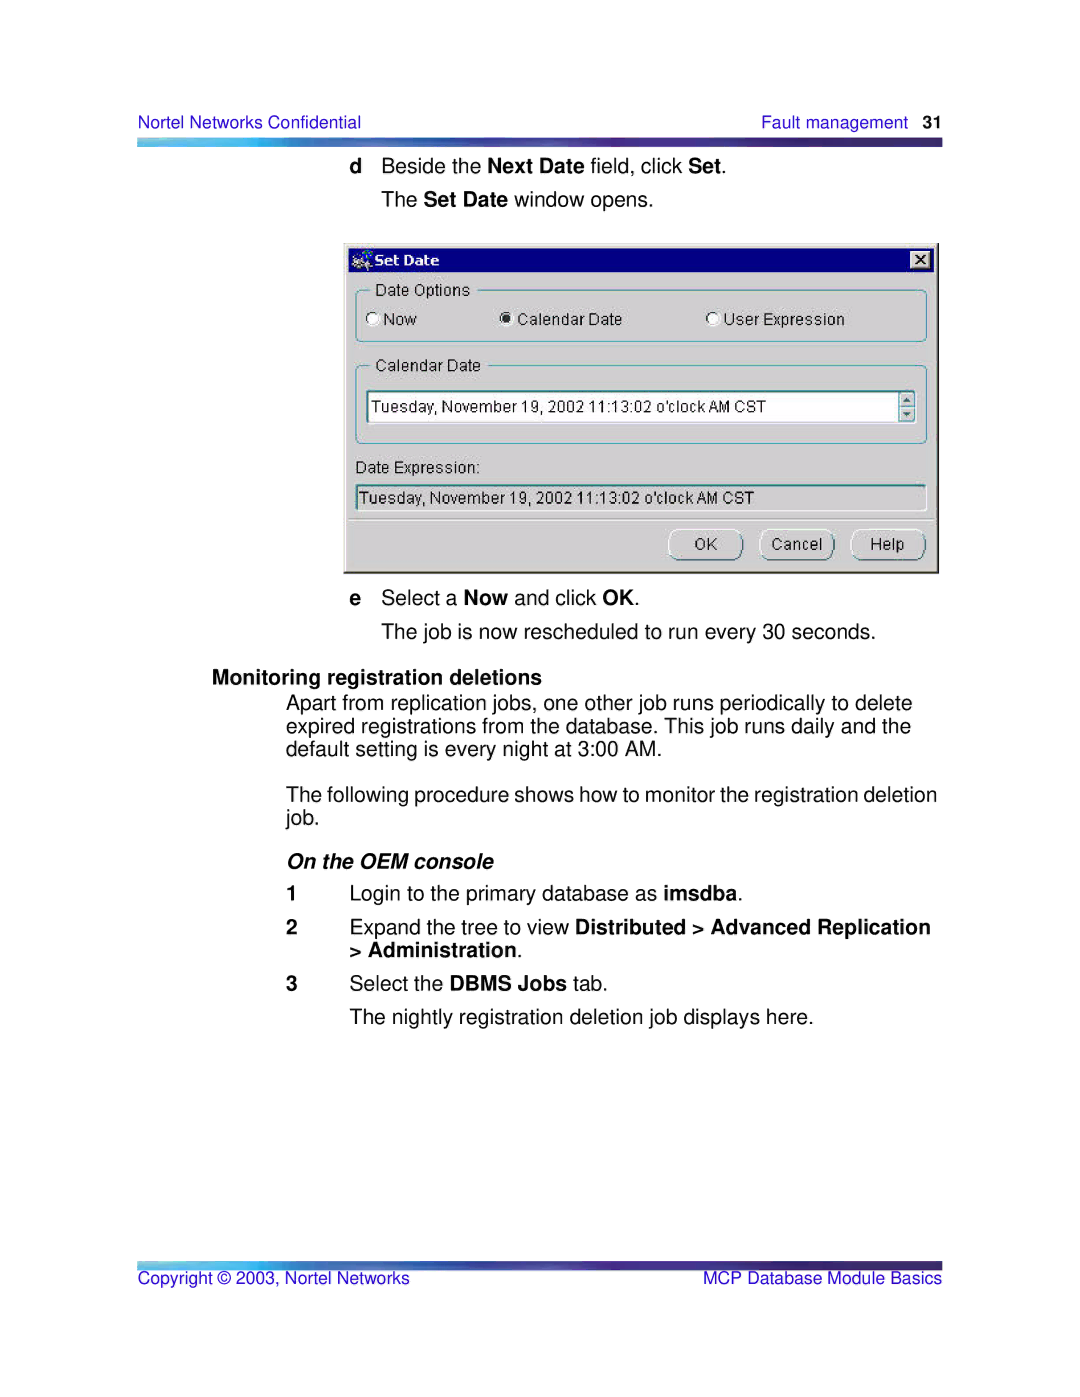 Nortel Networks Standard MCP 1.1 FP1 (02.02) manual Monitoring registration deletions, On the OEM console 